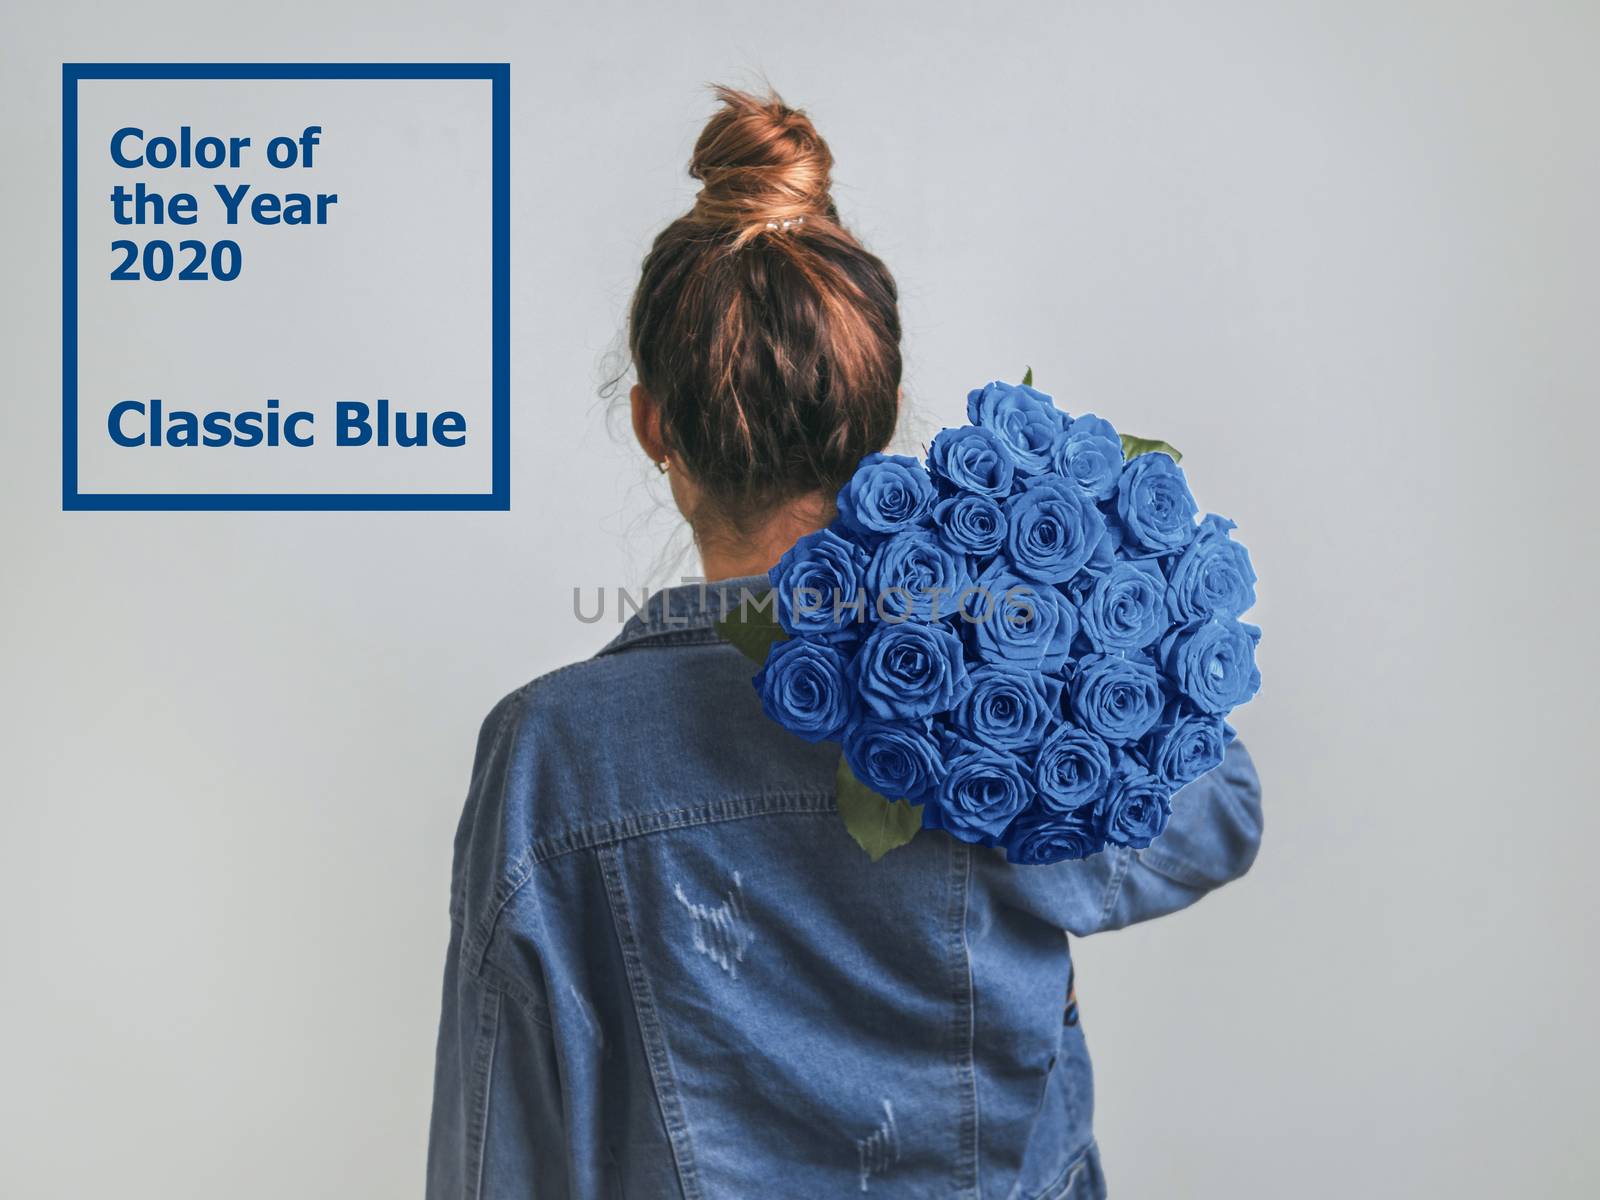 Back view of woman, holding Classic Blue roses by fascinadora